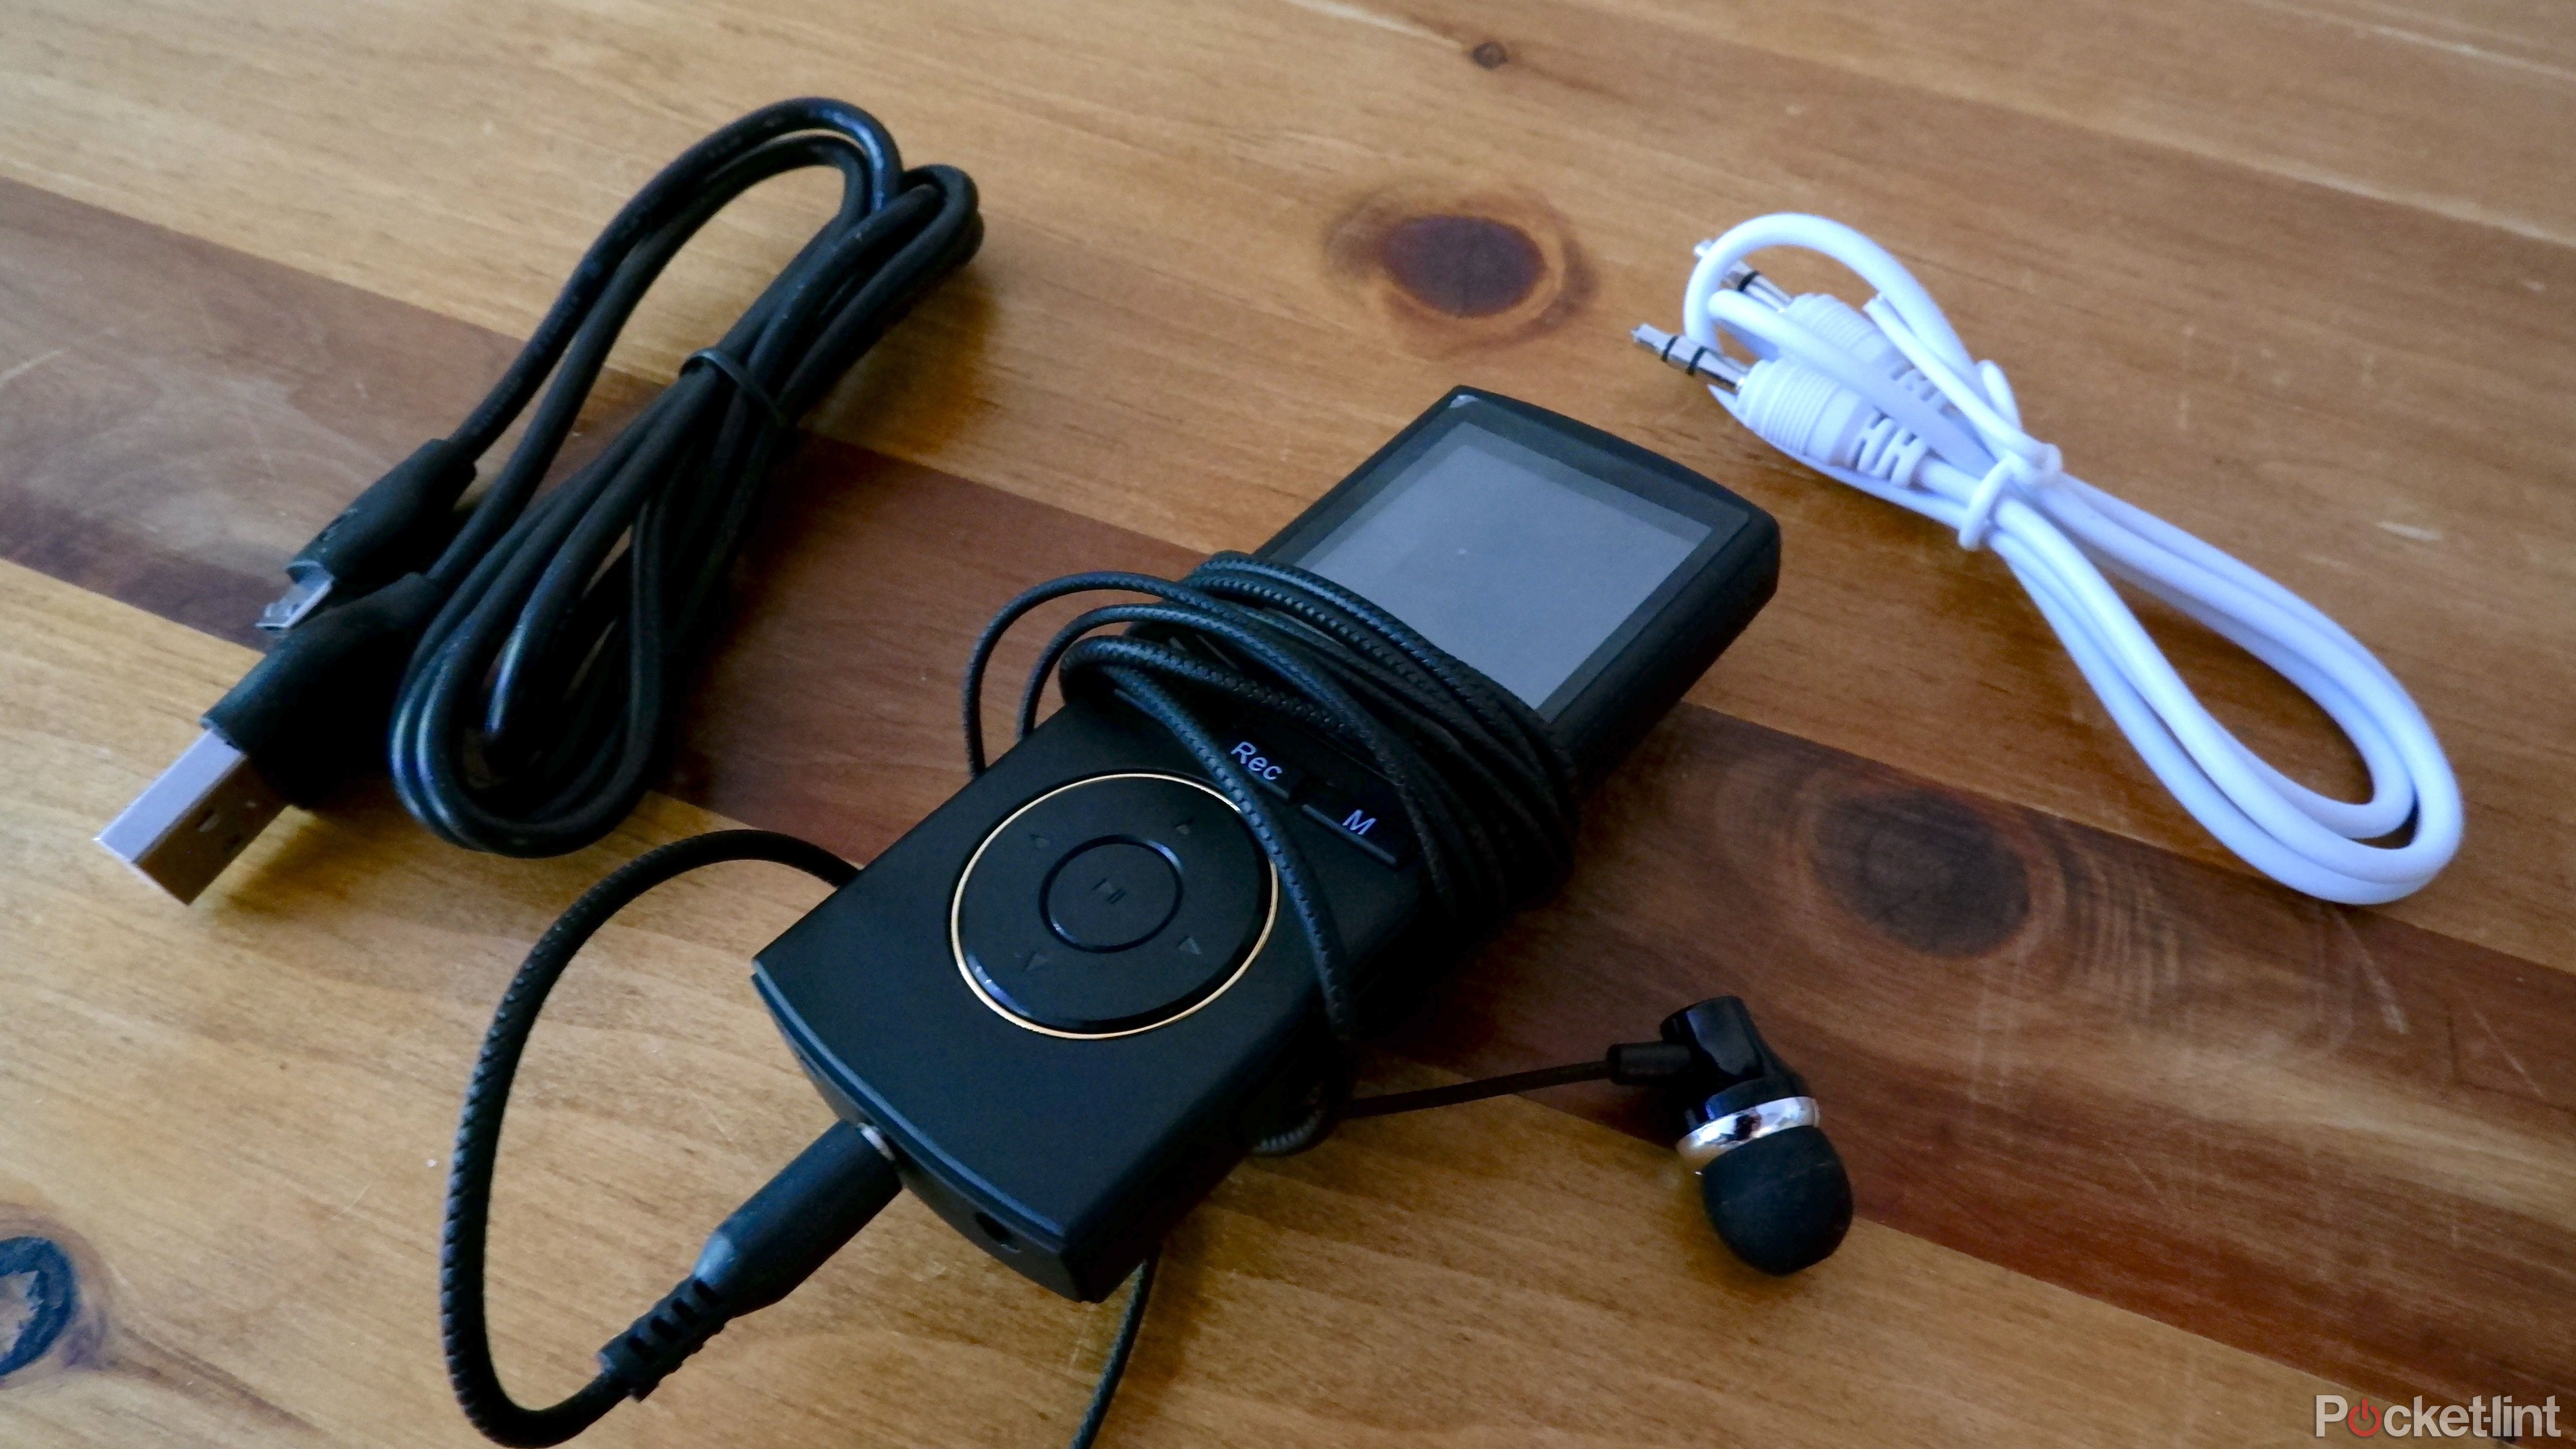 The Safuciiv MP3 player with the included earbuds plugged in, alongside the line-in cable and microUSB cable.